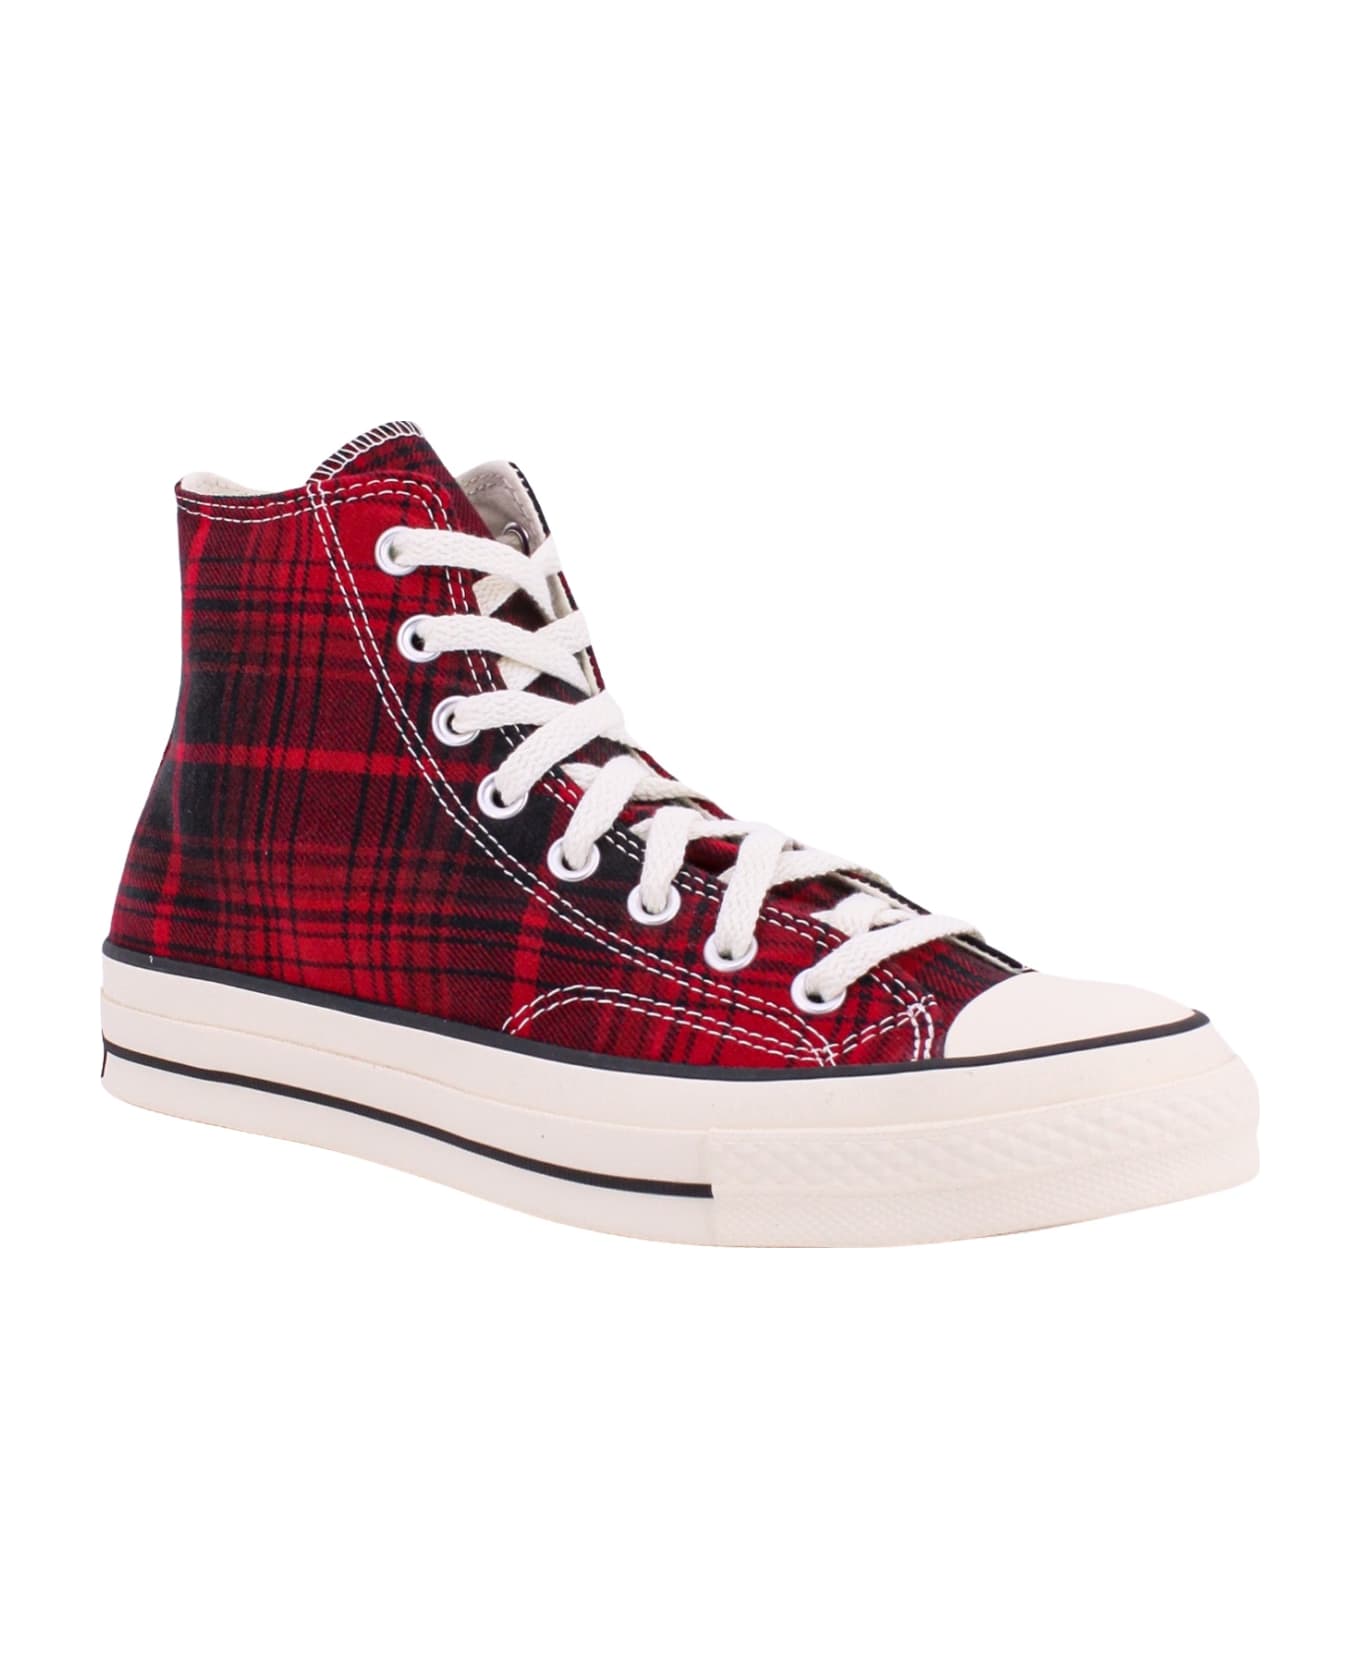 Converse Sneakers - Red